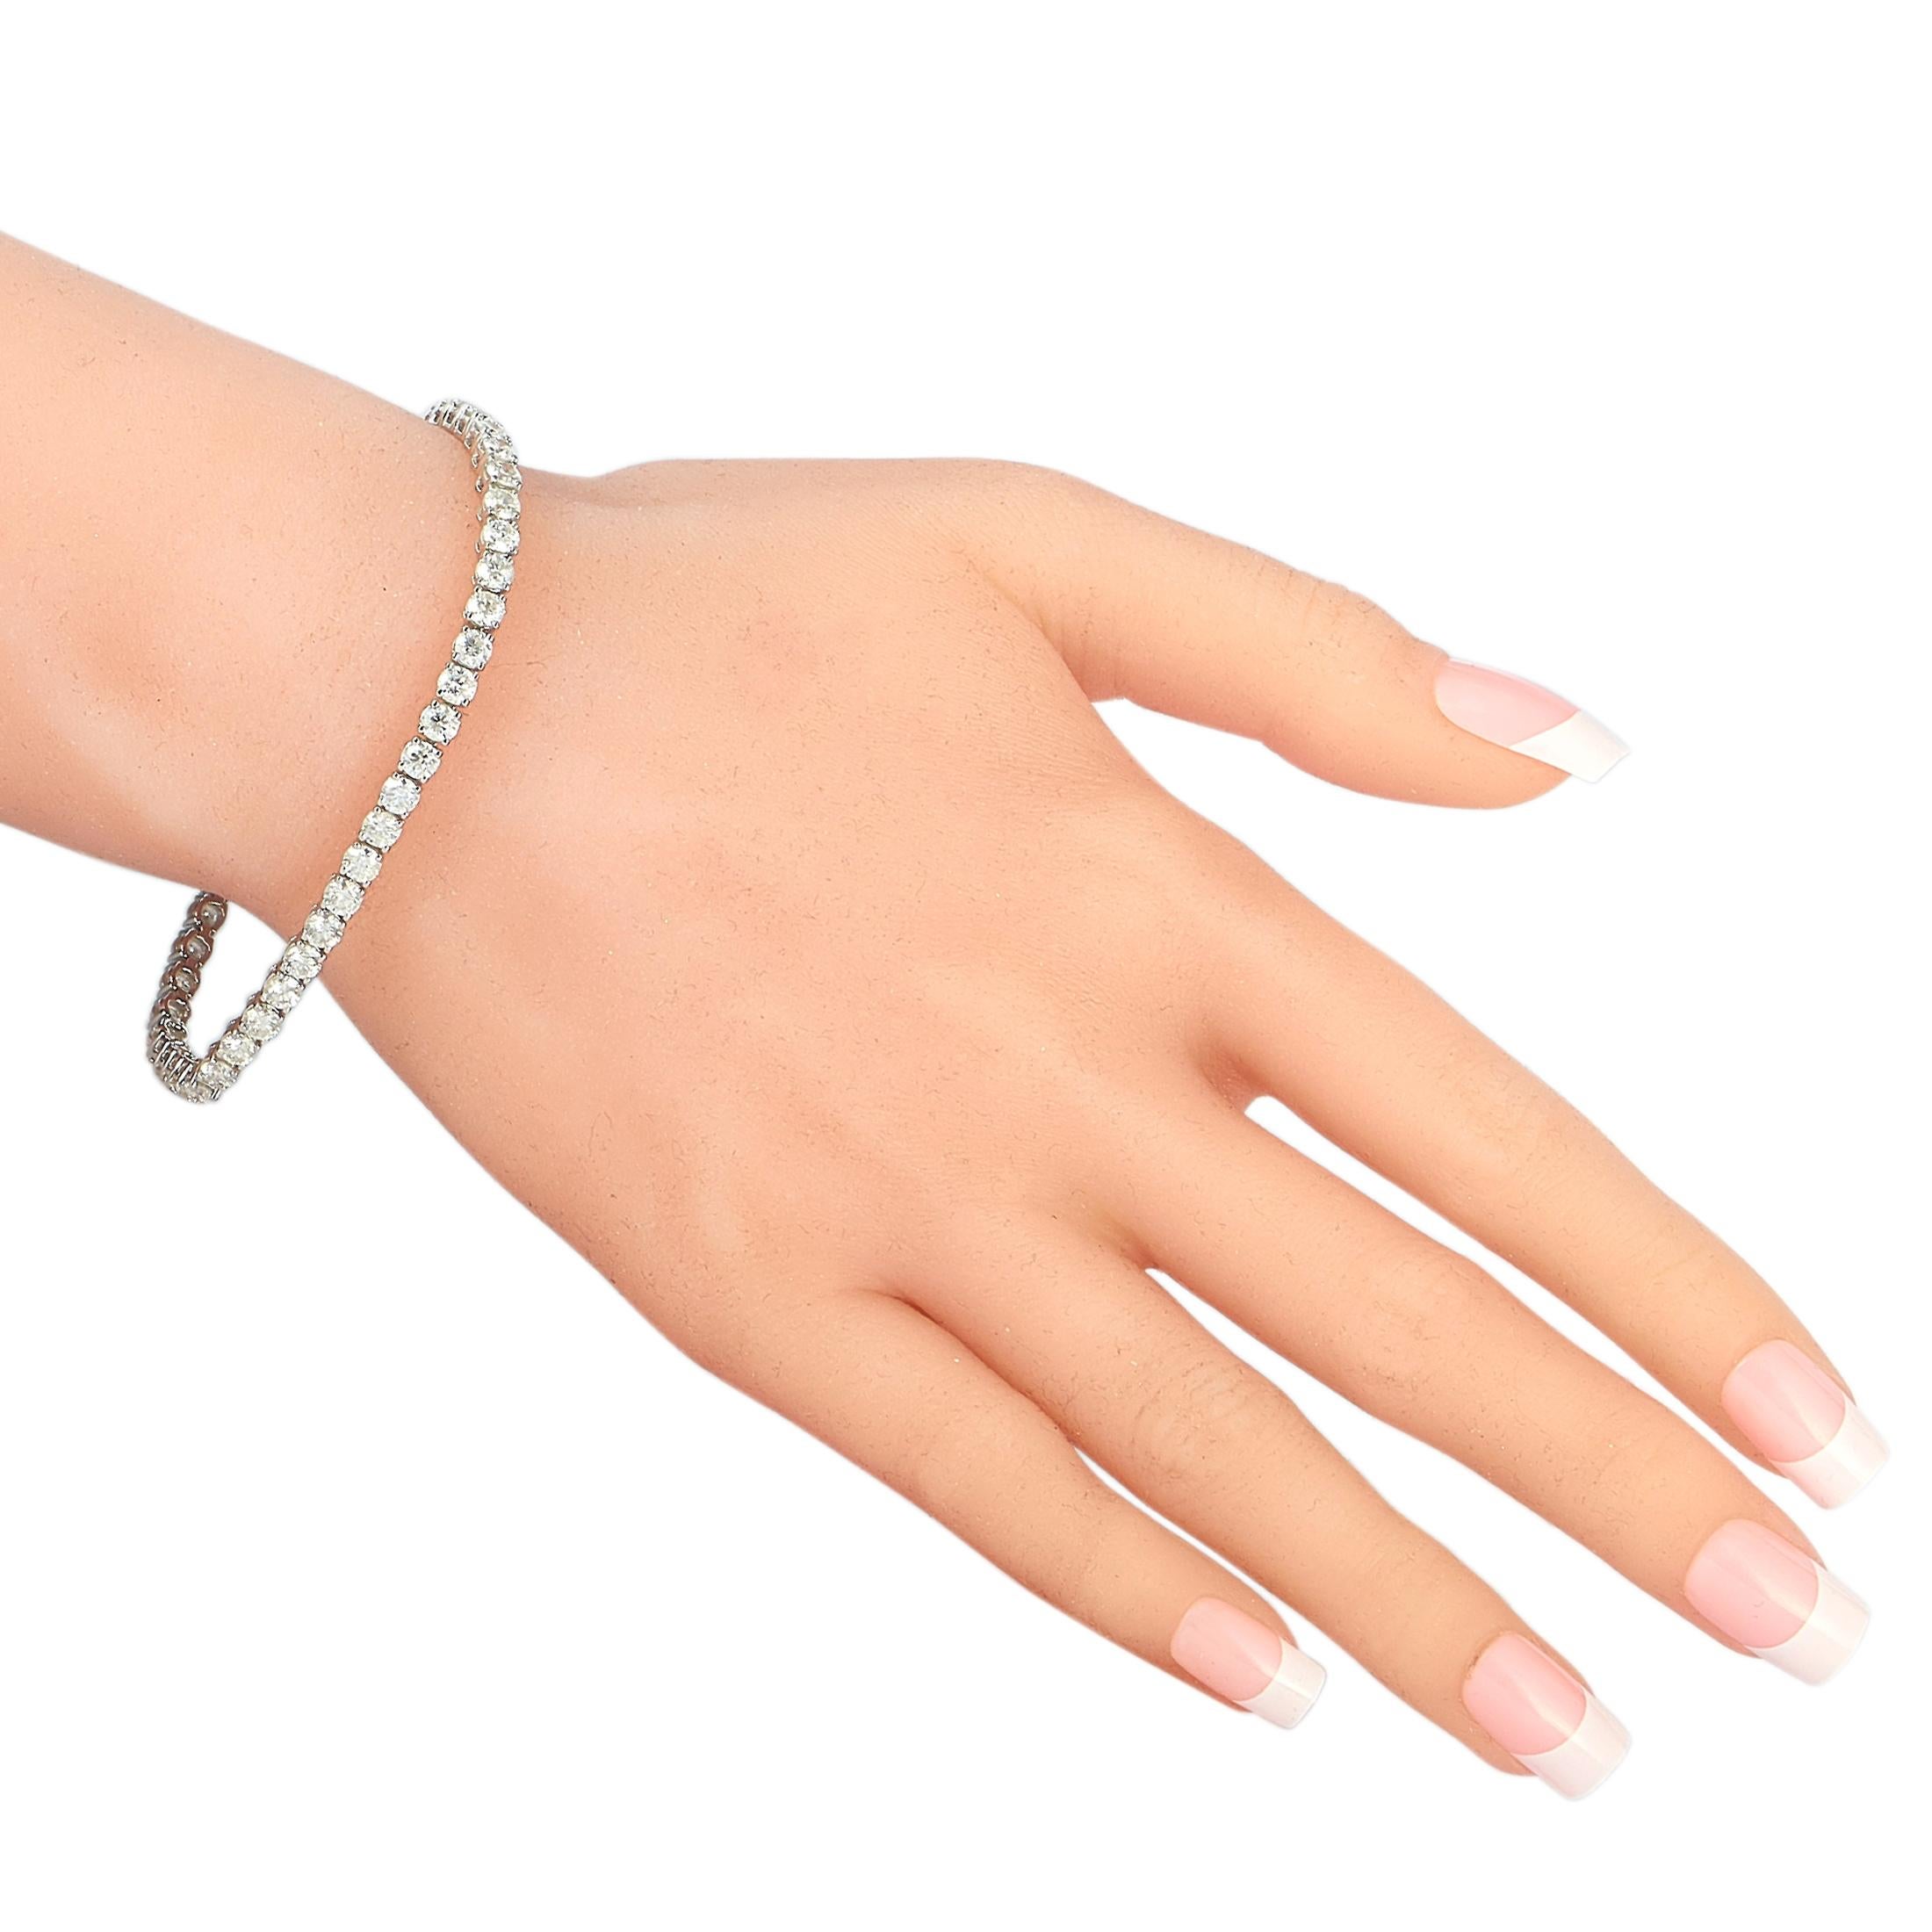 This LB Exclusive tennis bracelet is made of 14K white gold and embellished with diamonds that amount to 9.26 carats. The bracelet weighs 12.9 grams and measures 7.25” in length.
 
 Offered in brand new condition, this jewelry piece includes a gift